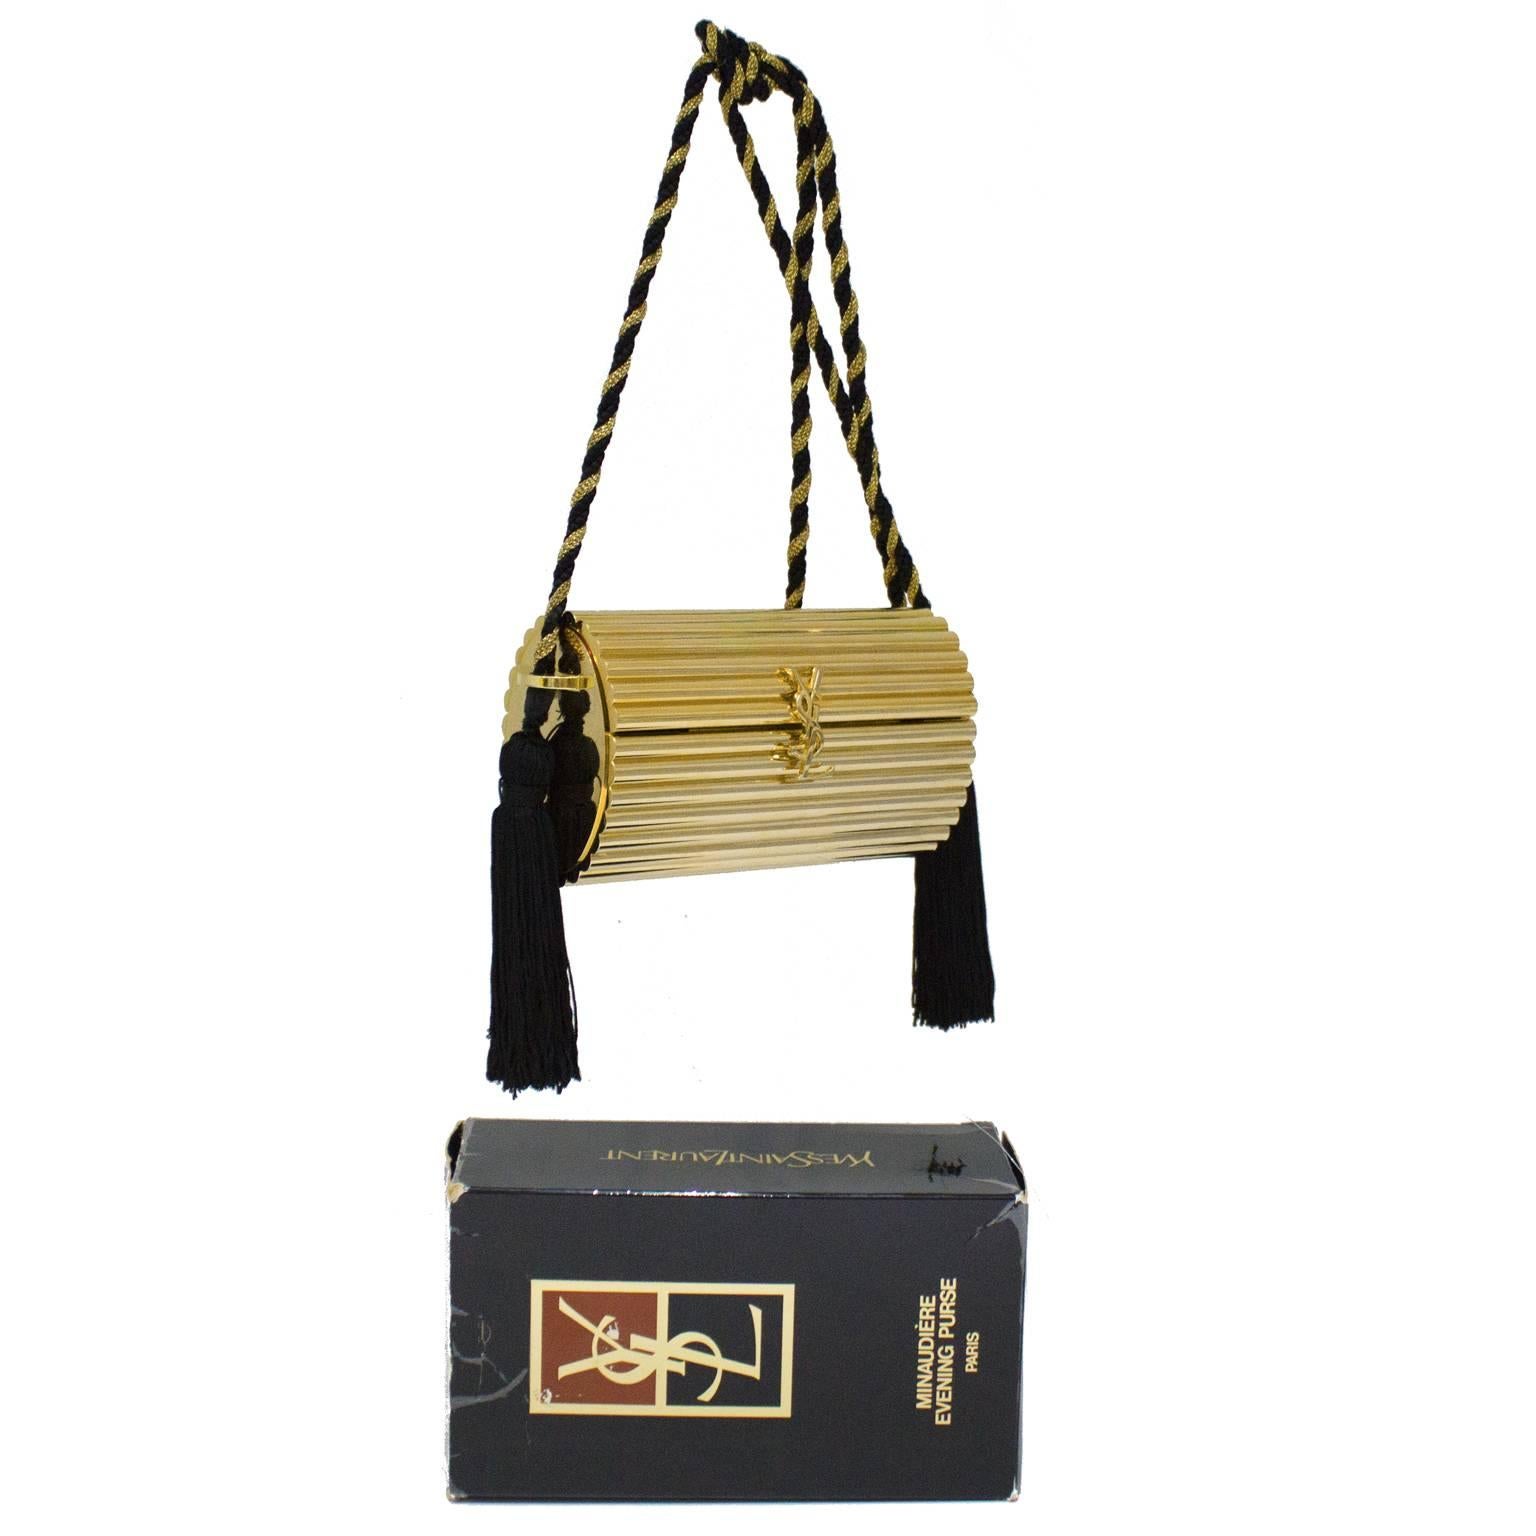 Gold metal box clutch with twisted silk cord shoulder strap by Yves Saint Laurent. The hardshell body is ribbed and shaped like a oval cylinder. Opens at the front with a hinge, YSL clasp, and is lined in gold leather. Gold and black twisted cord